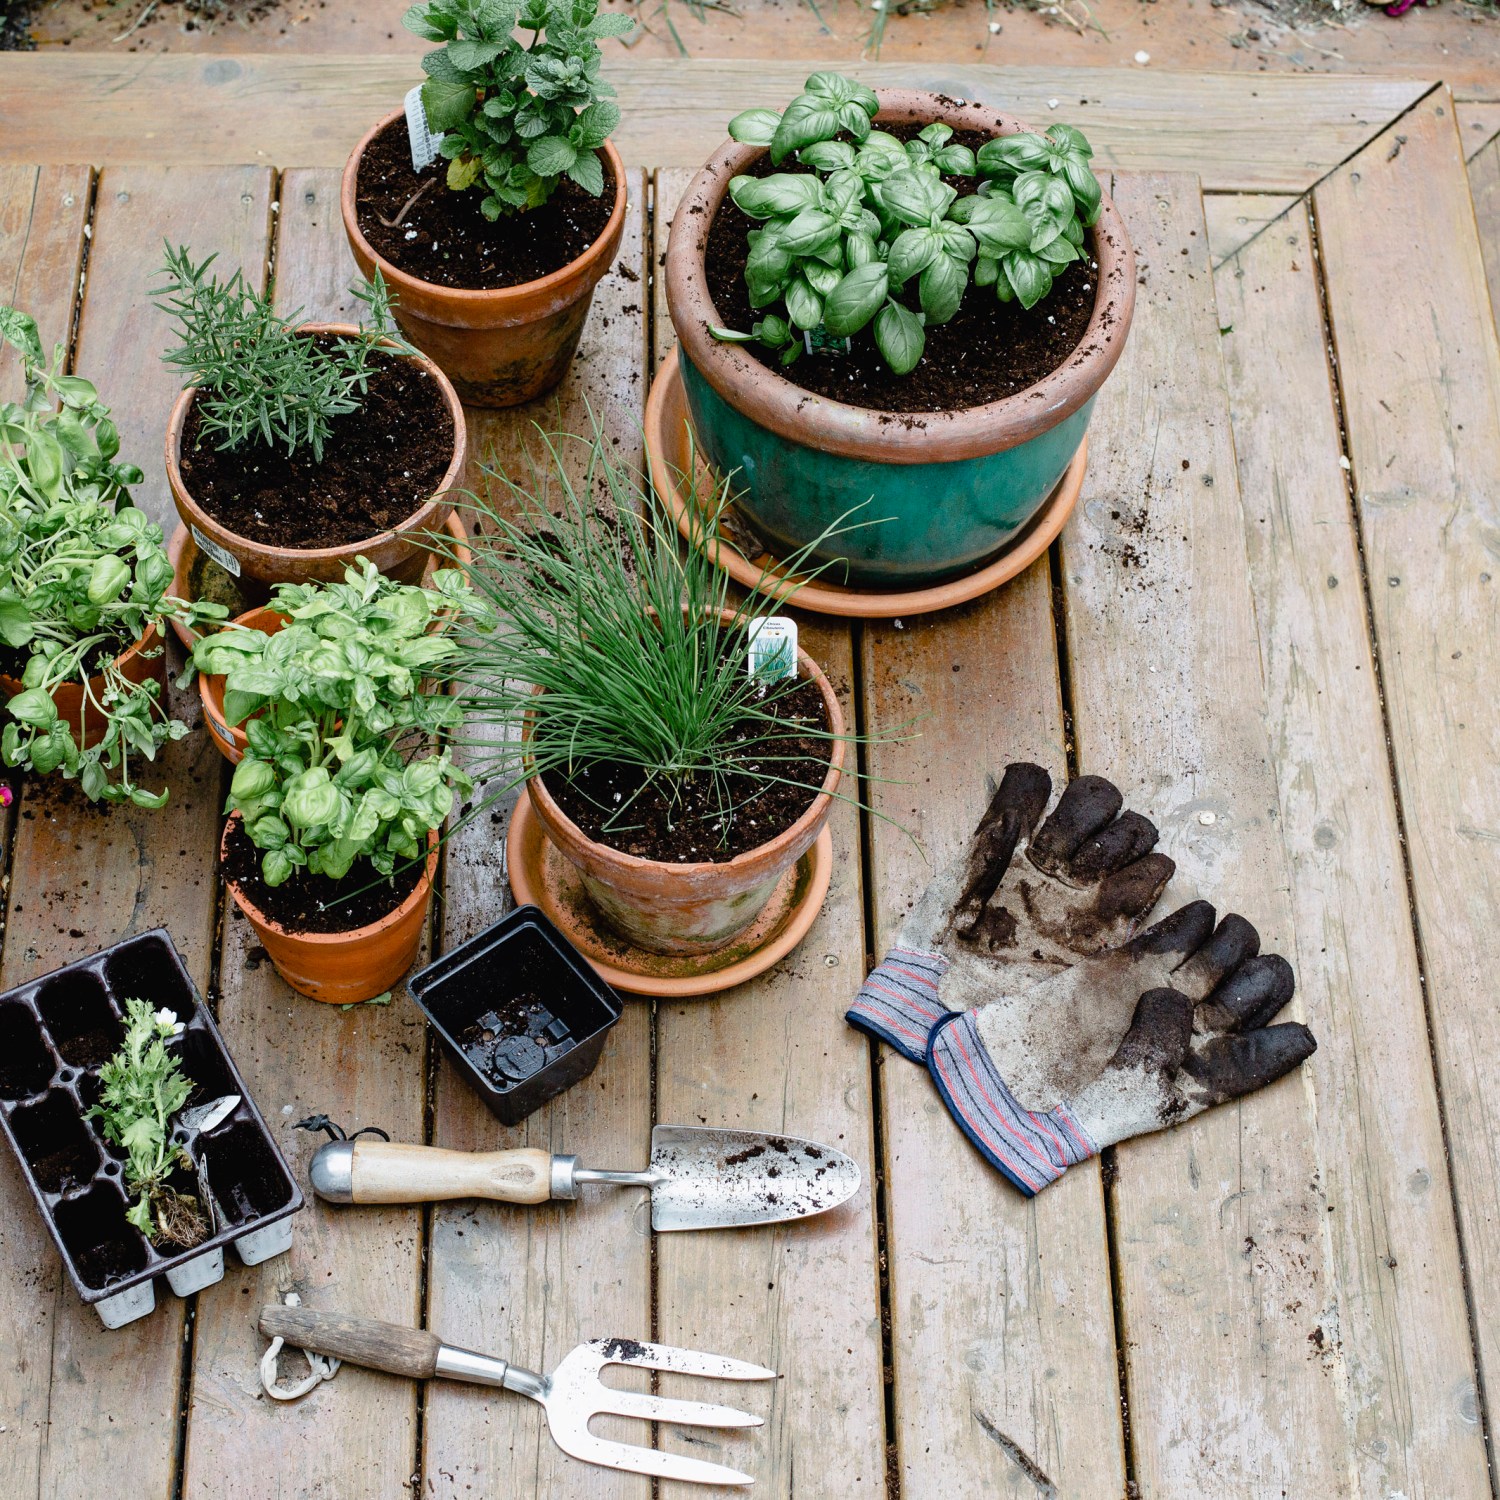 A variety of potted plants, flowers, herbs, and gardening equipment - the start of a garden for a beginner.